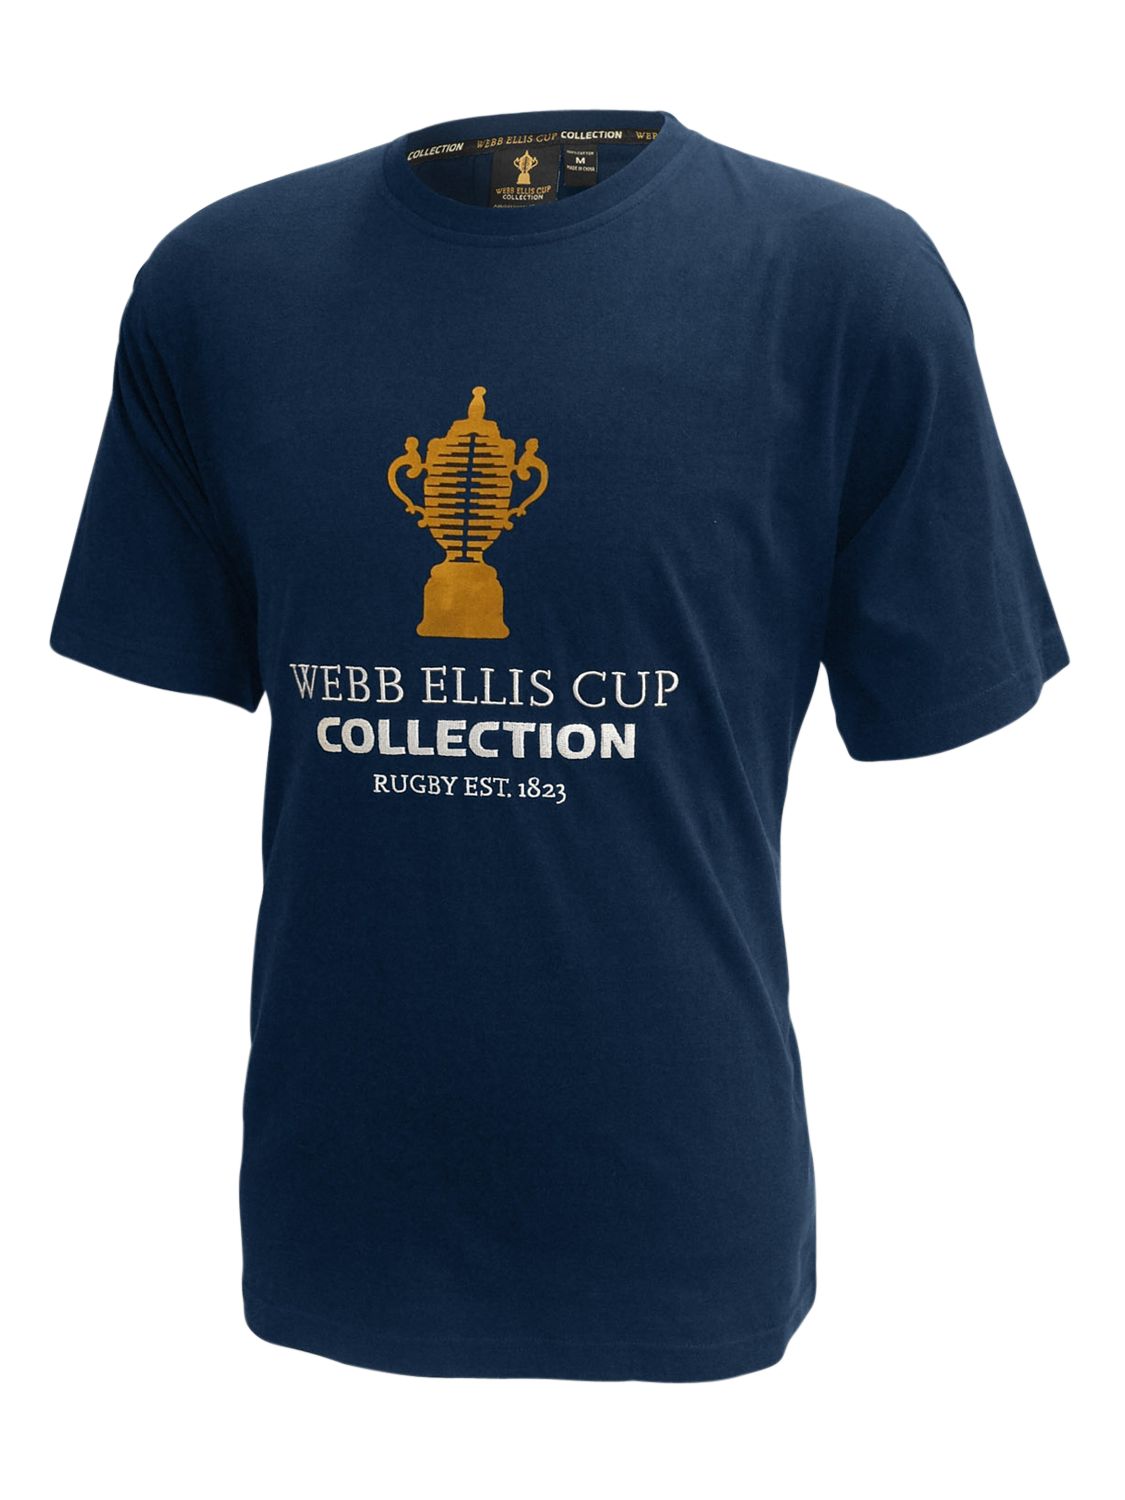 Rugby World Cup 2011 Rugby World Cup Webb Ellis Cup T-Shirt, Navy